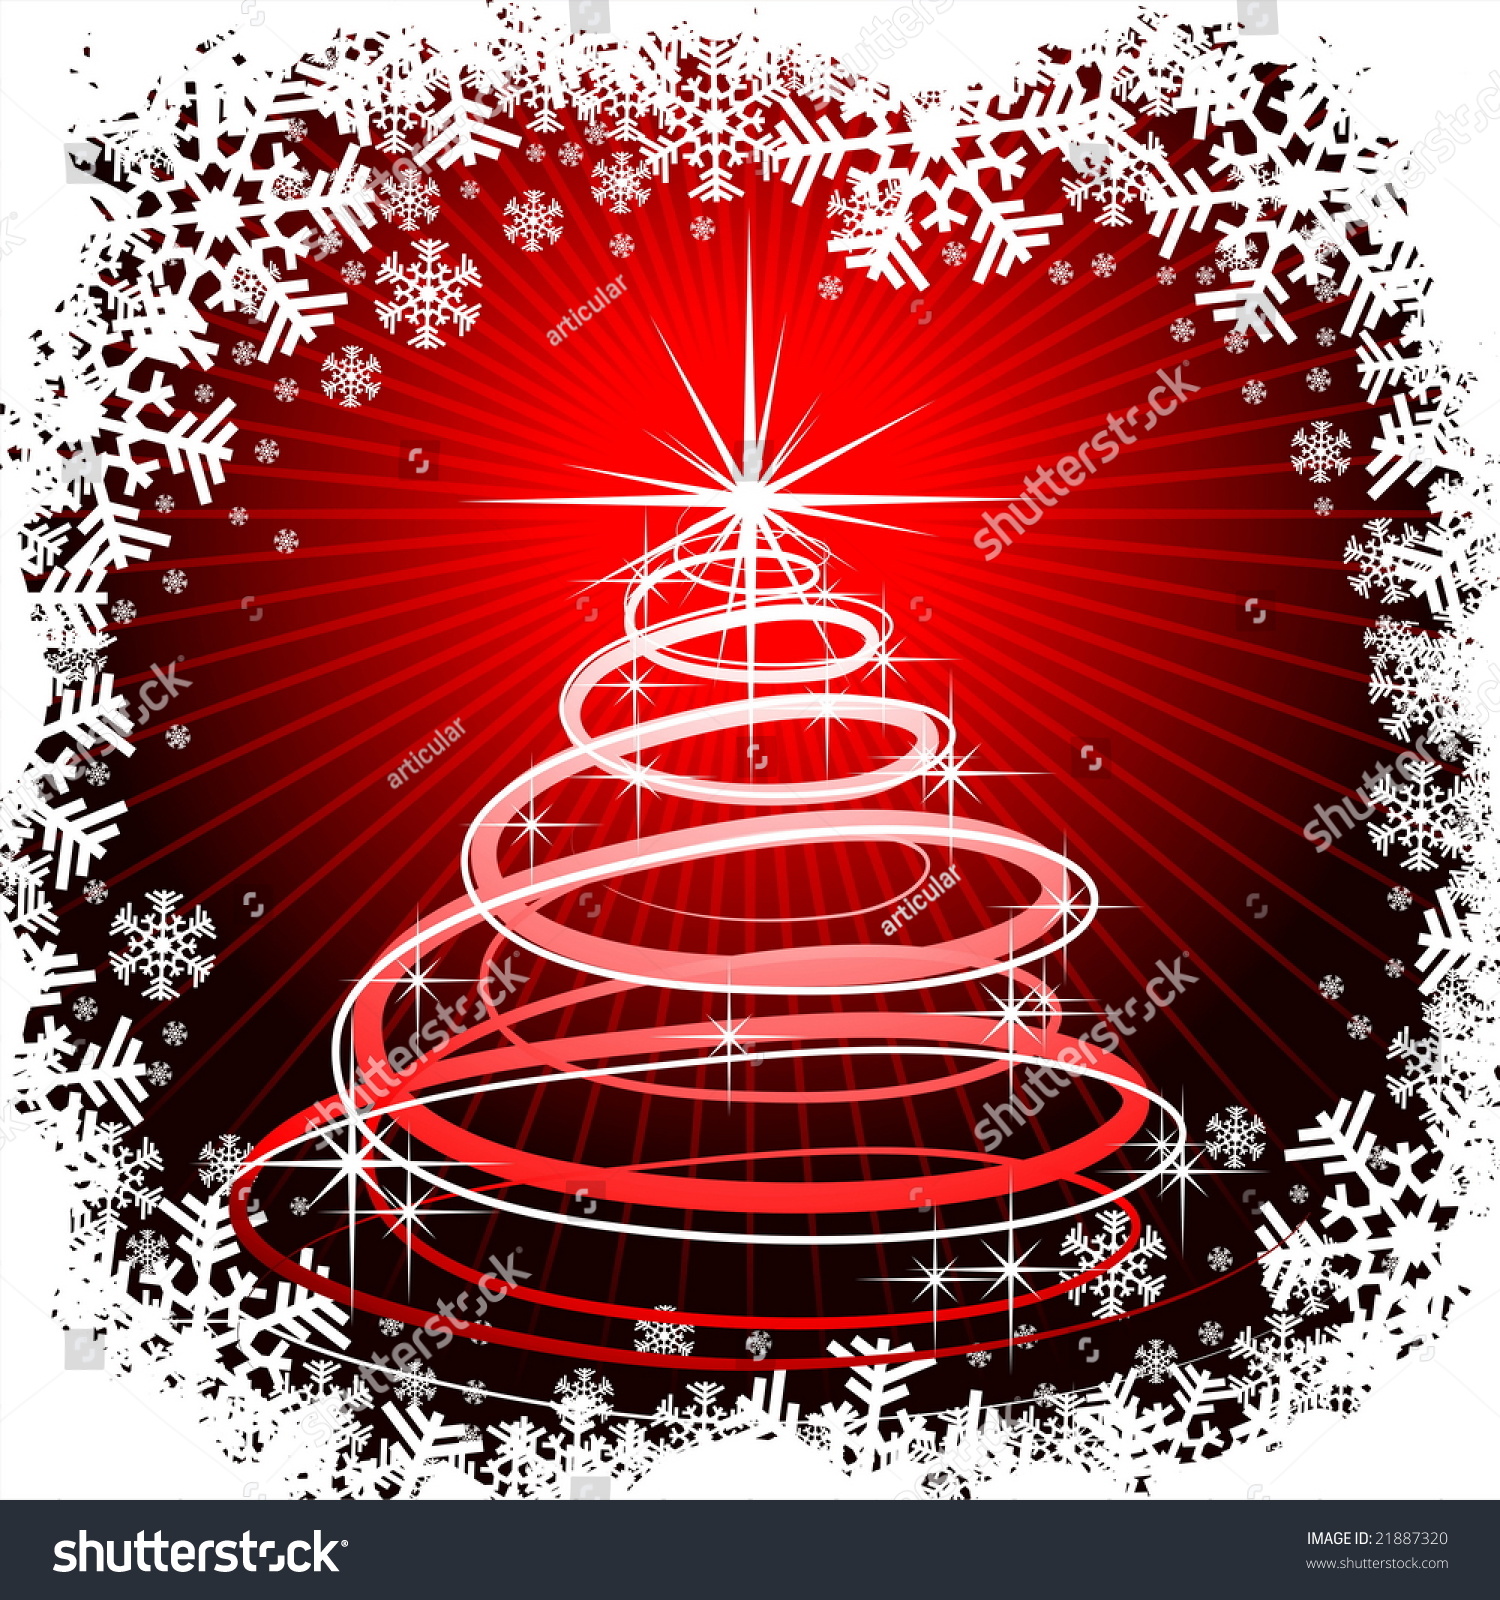 Christmas Illustration With Abstract Tree On Red Background. (Jpg ...